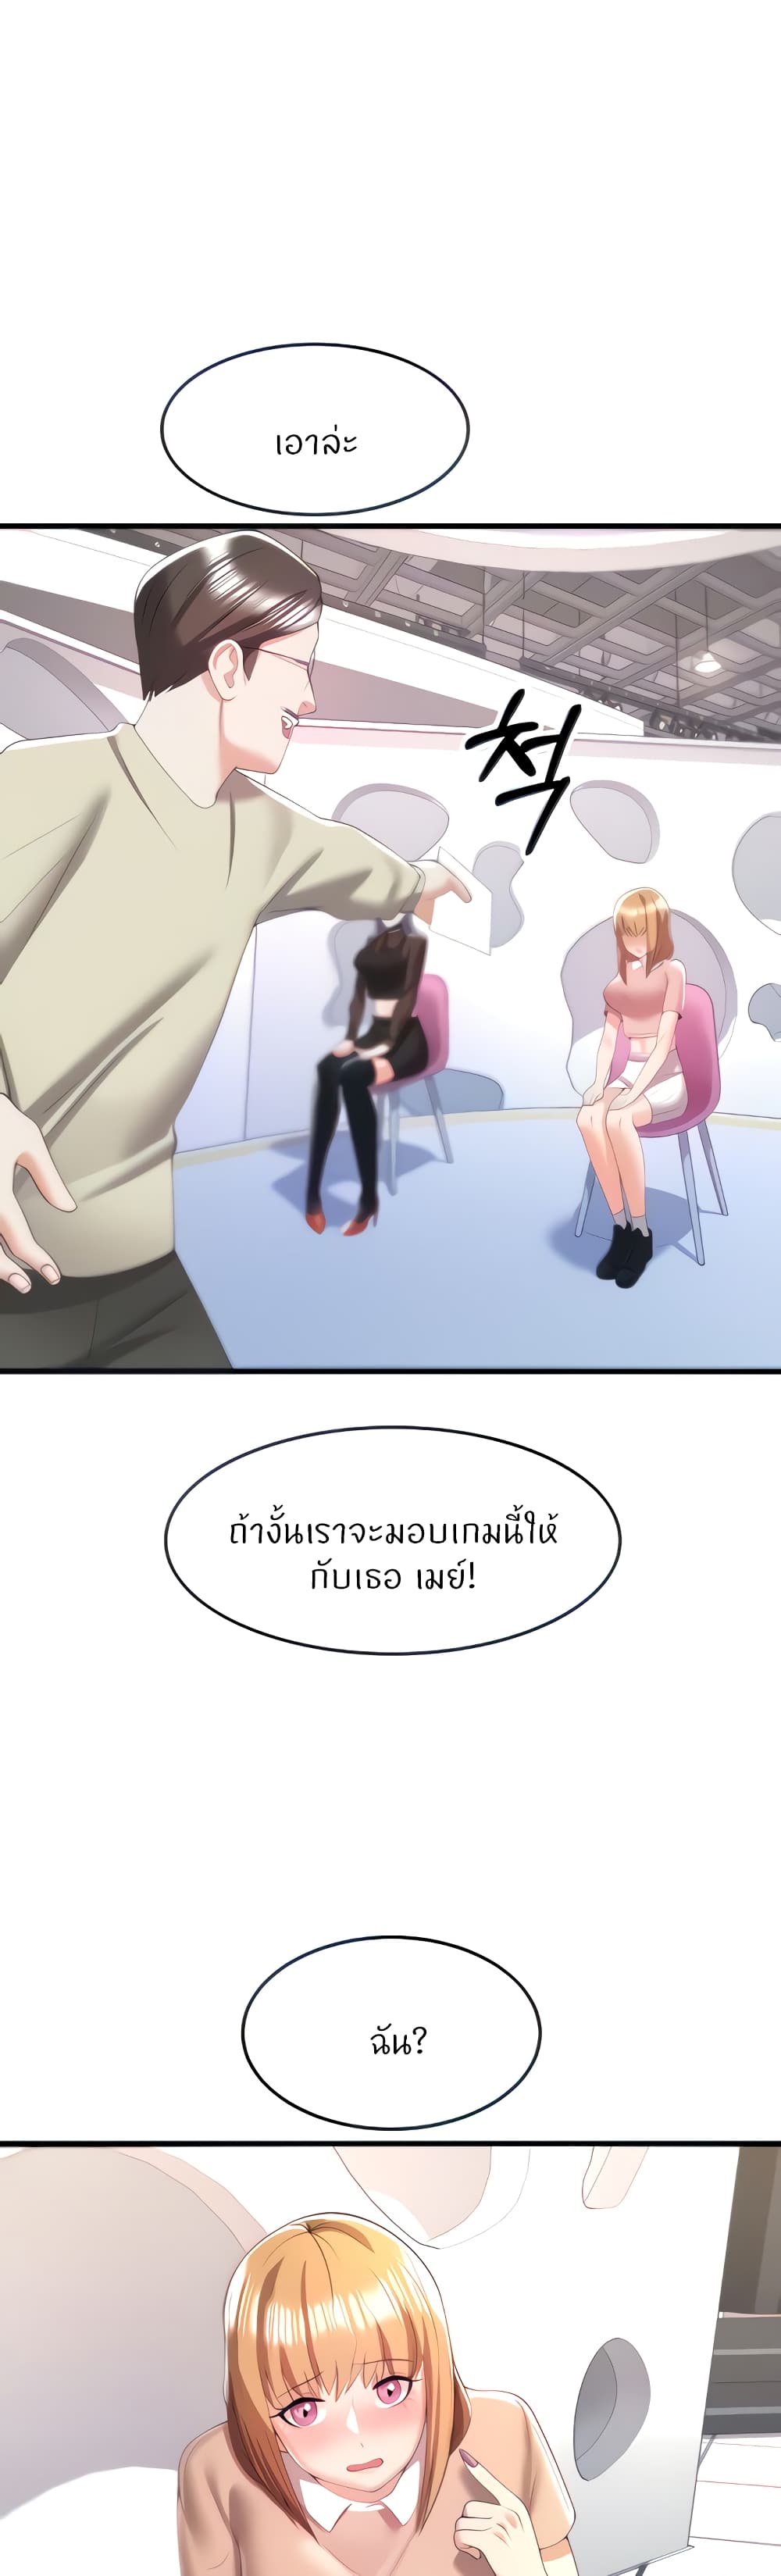 Making Friends With Streamers by Hacking! ตอนที่ 9 ภาพ 7